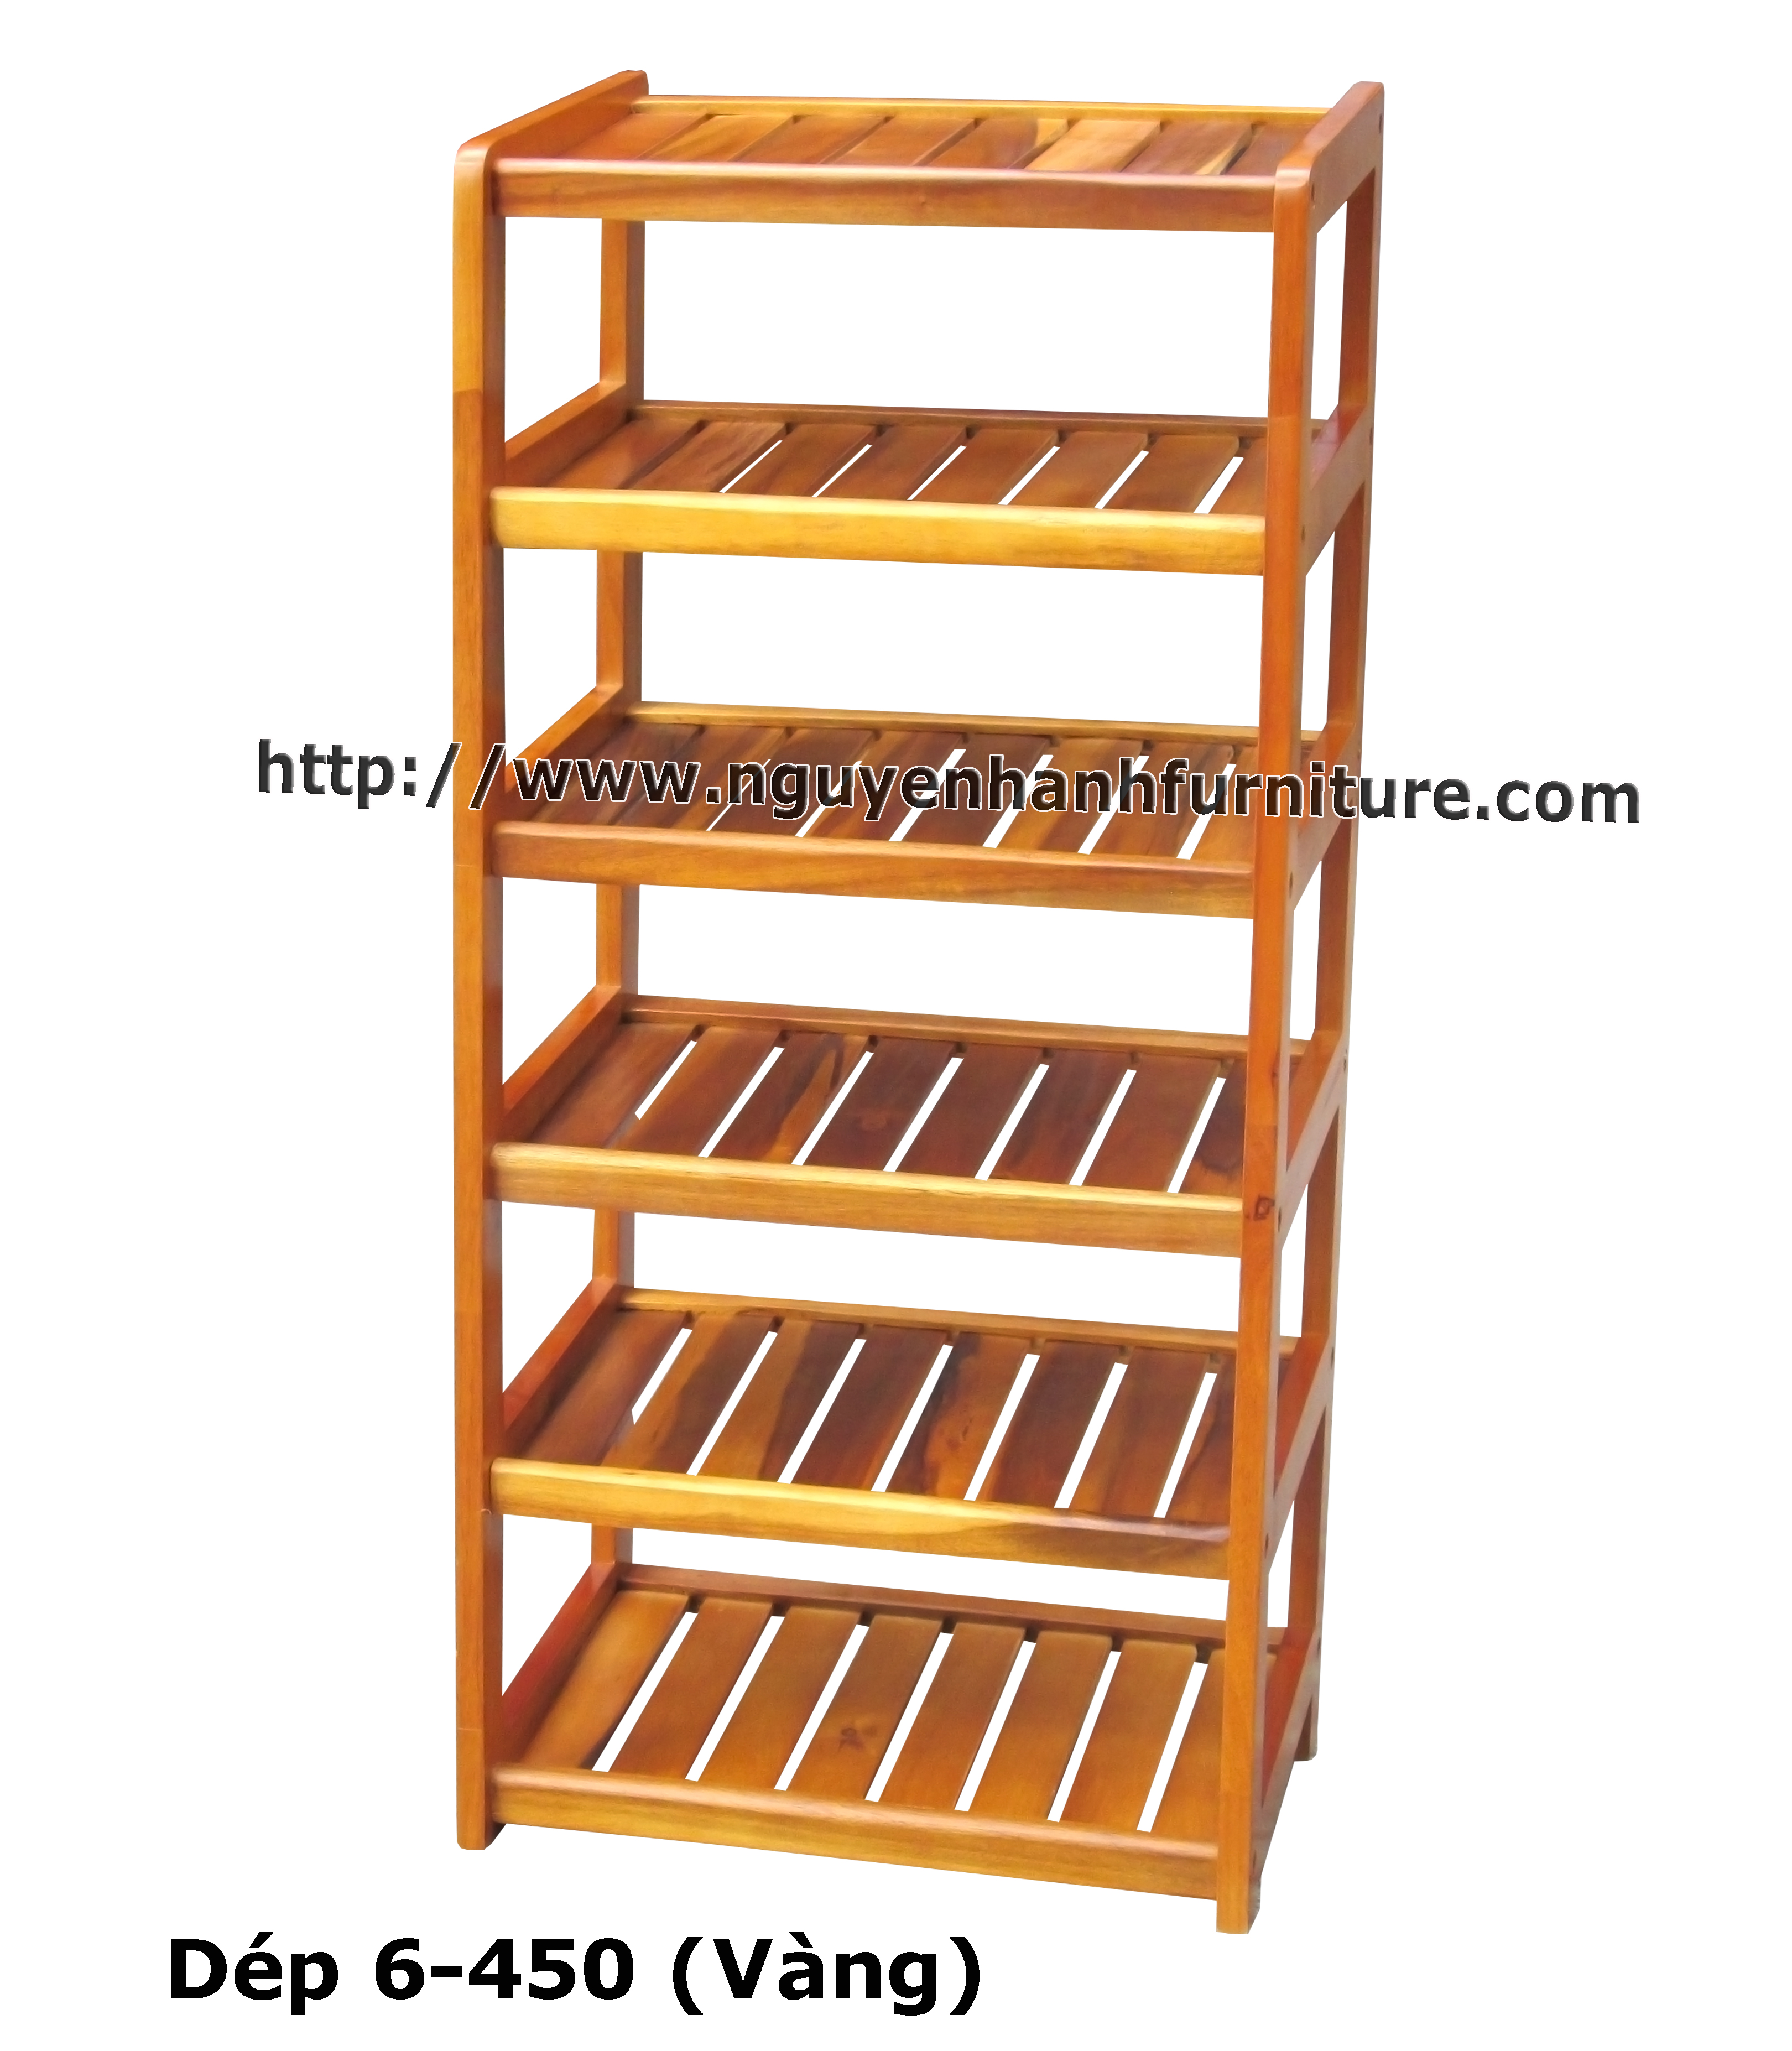 Name product: Shoeshelf 6 Floors 450 with sparse blades (Yellow) - Dimensions: 45 x 30 x 98 (H) - Description: Wood natural rubber